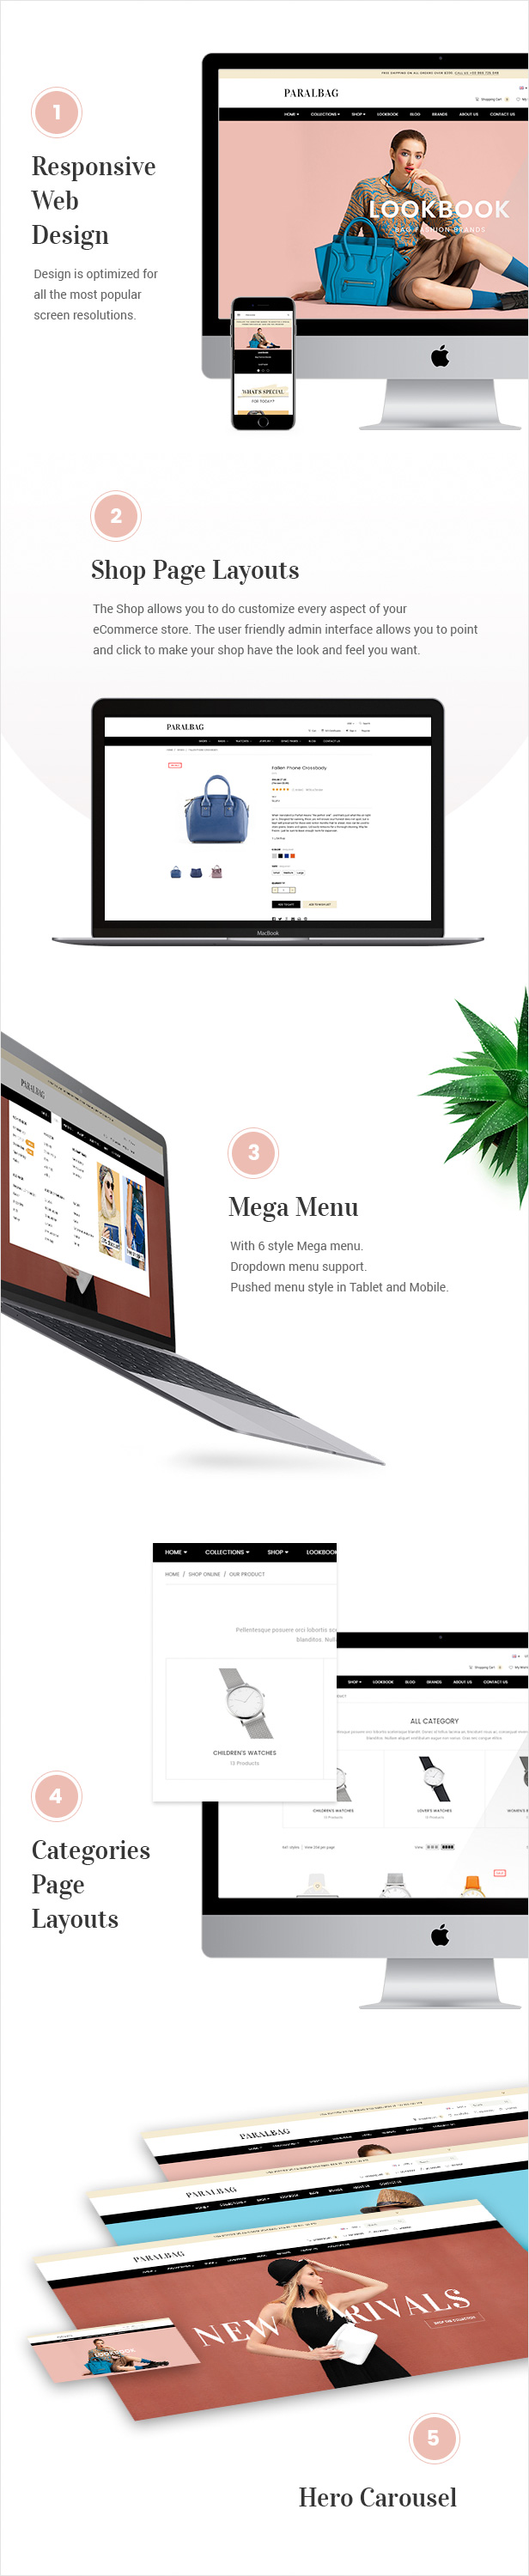 Responsive Web Design, Shop Page Layouts, Mega Menu, Category Page Layouts, Hero Carousel, Products List